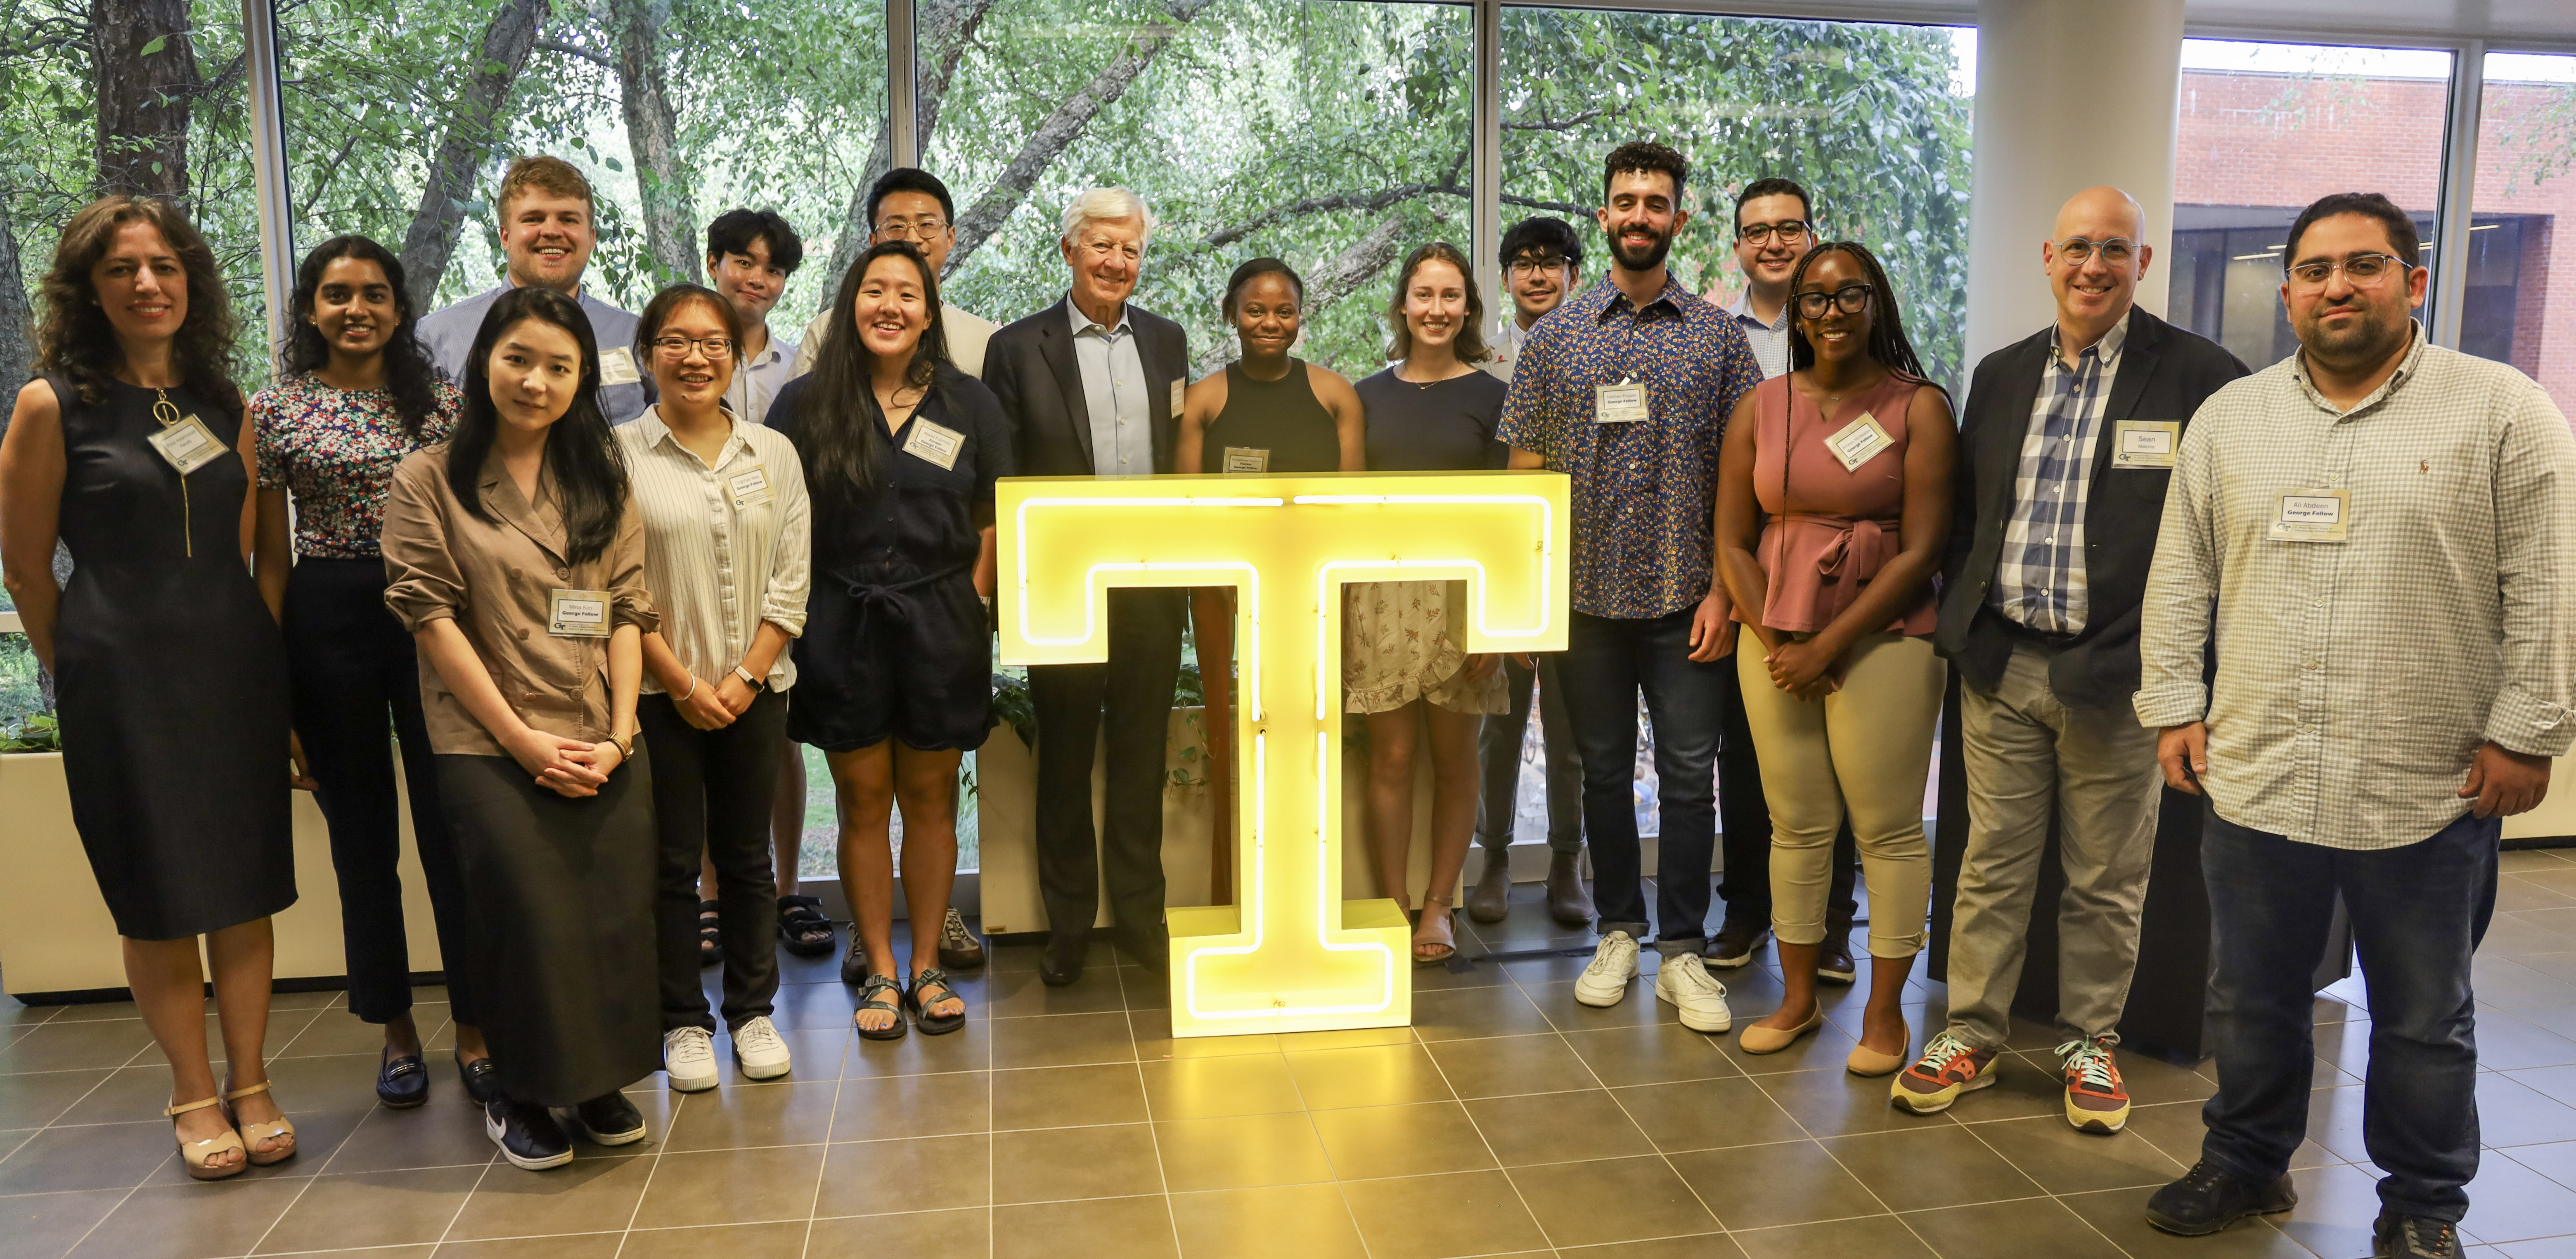 Former George Fellowship recipients gathered with Bill George and faculty from the H. Milton Stewart School of Industrial and Systems Engineering (ISyE) faculty for an afternoon “T.”